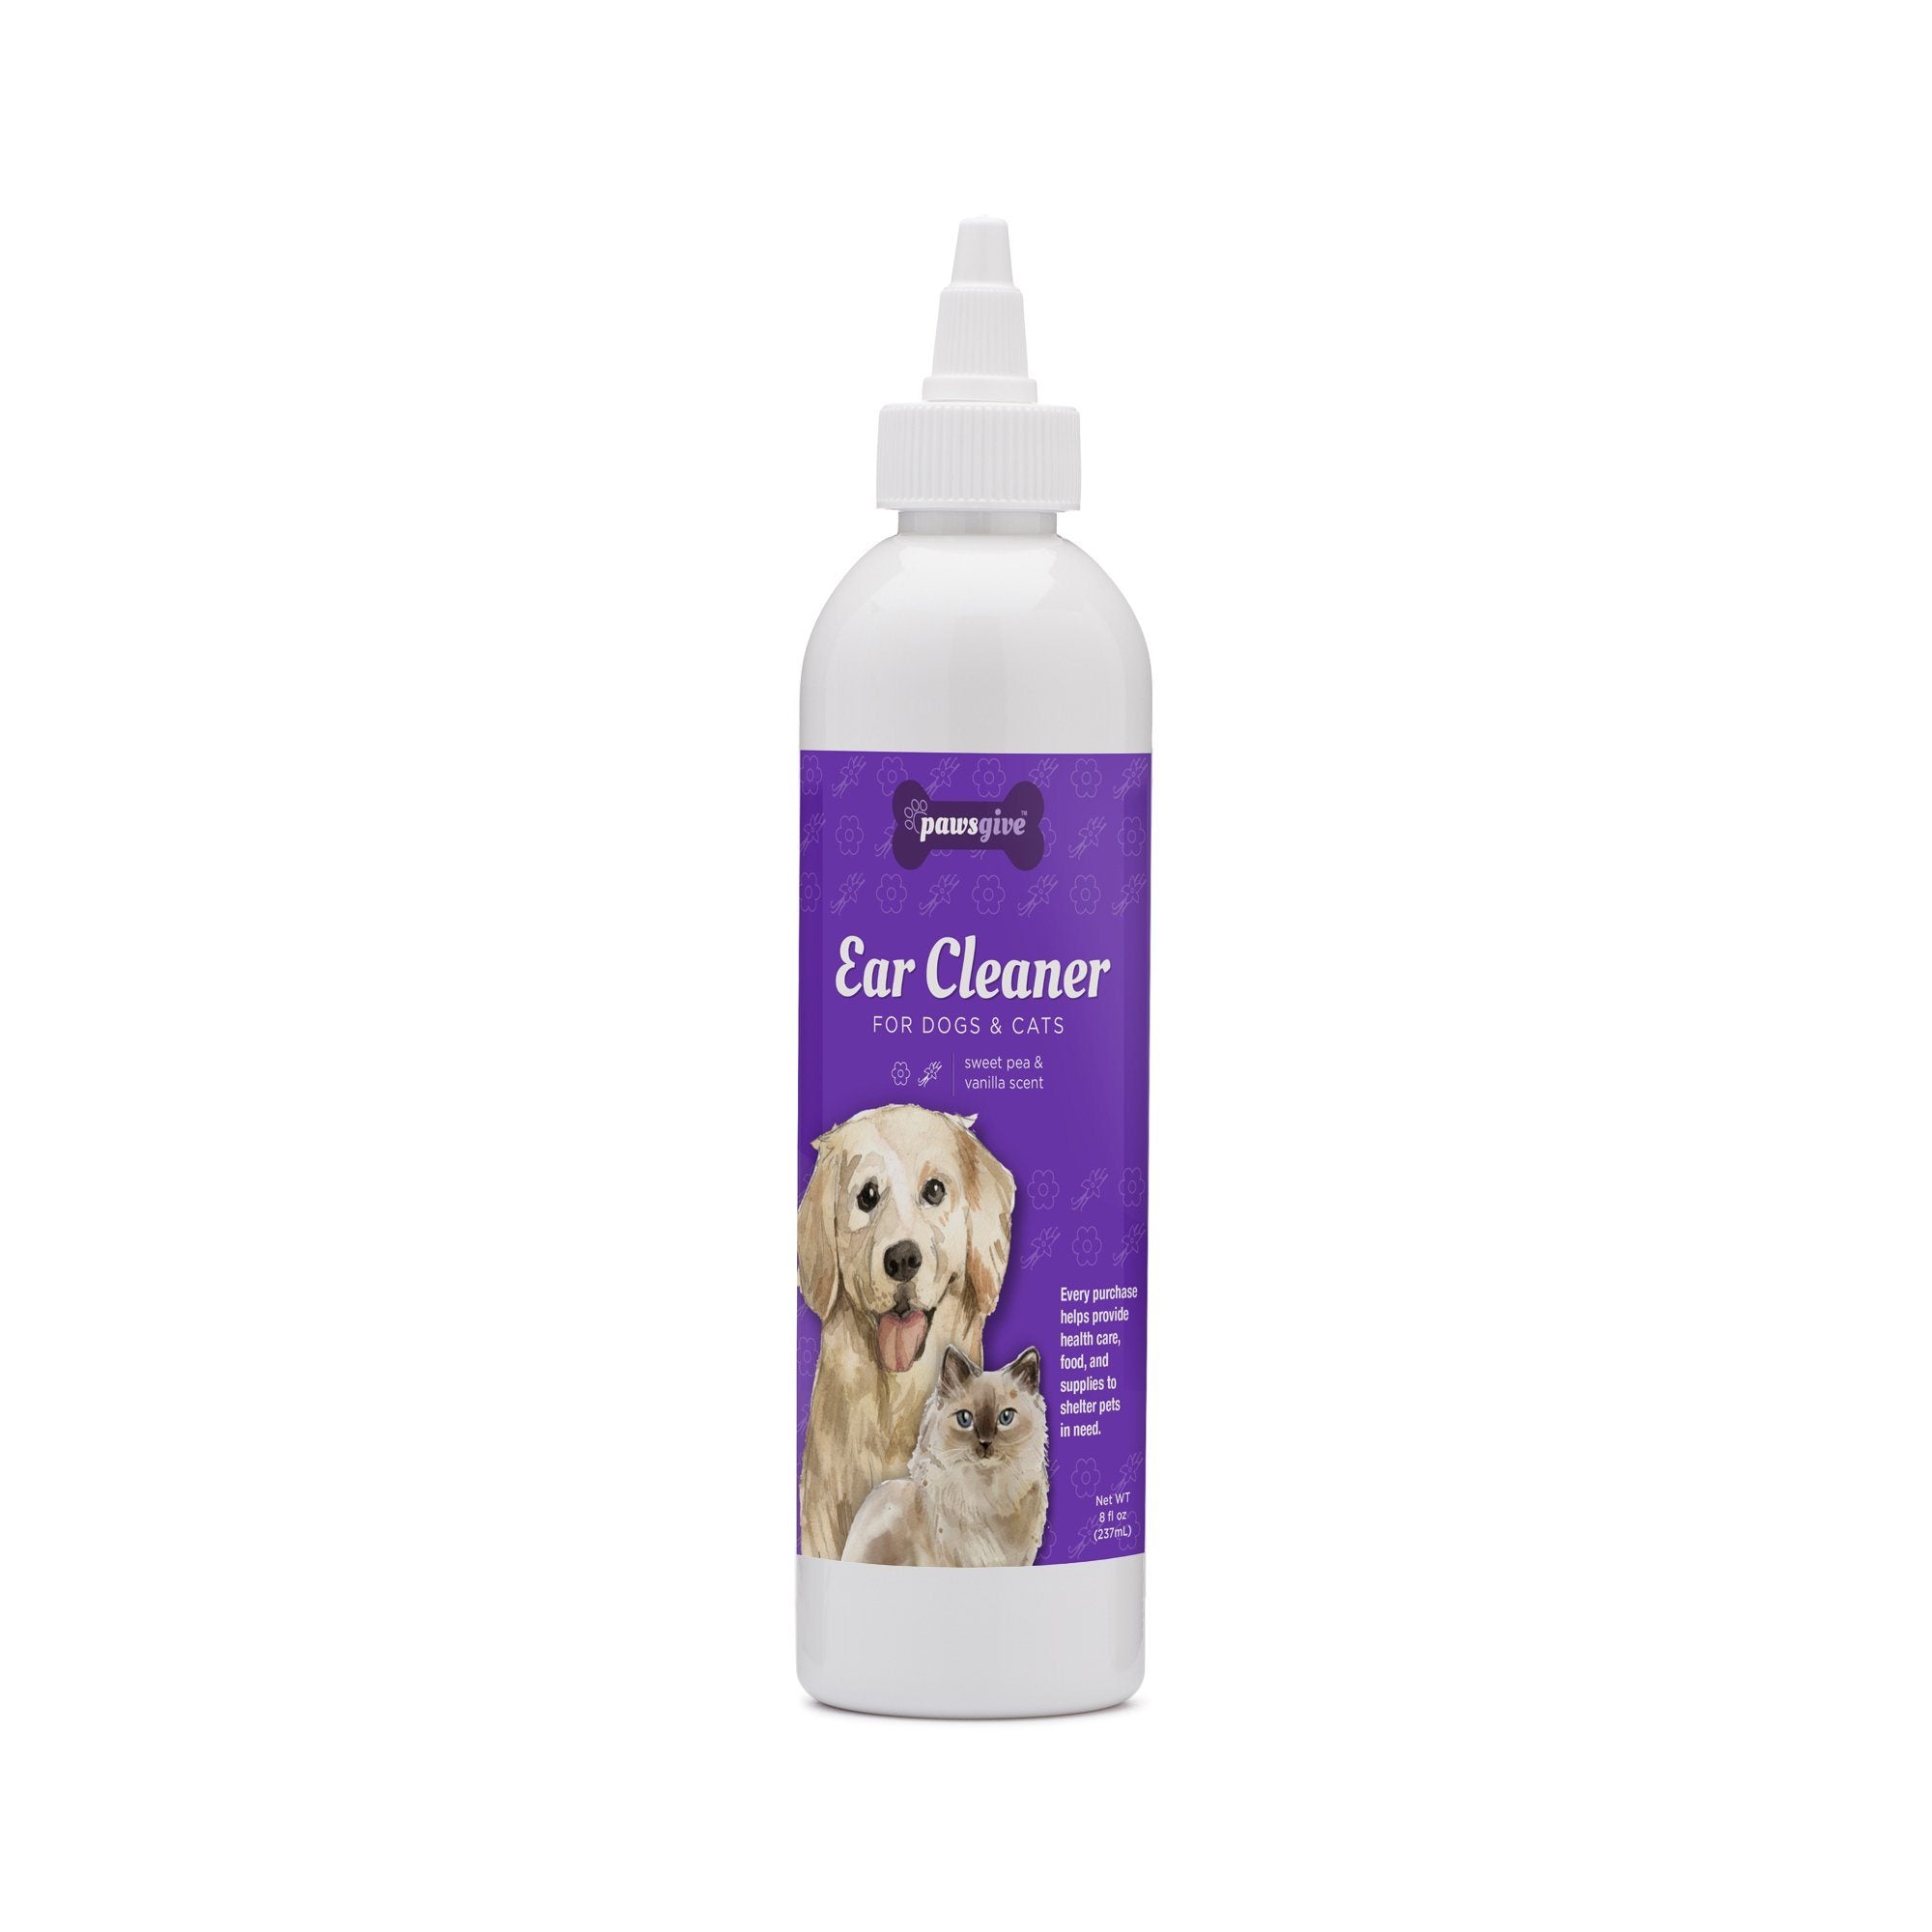 PawsGive Ear Cleaner For Dogs And Cats , Gently Cleans And Deodorizes